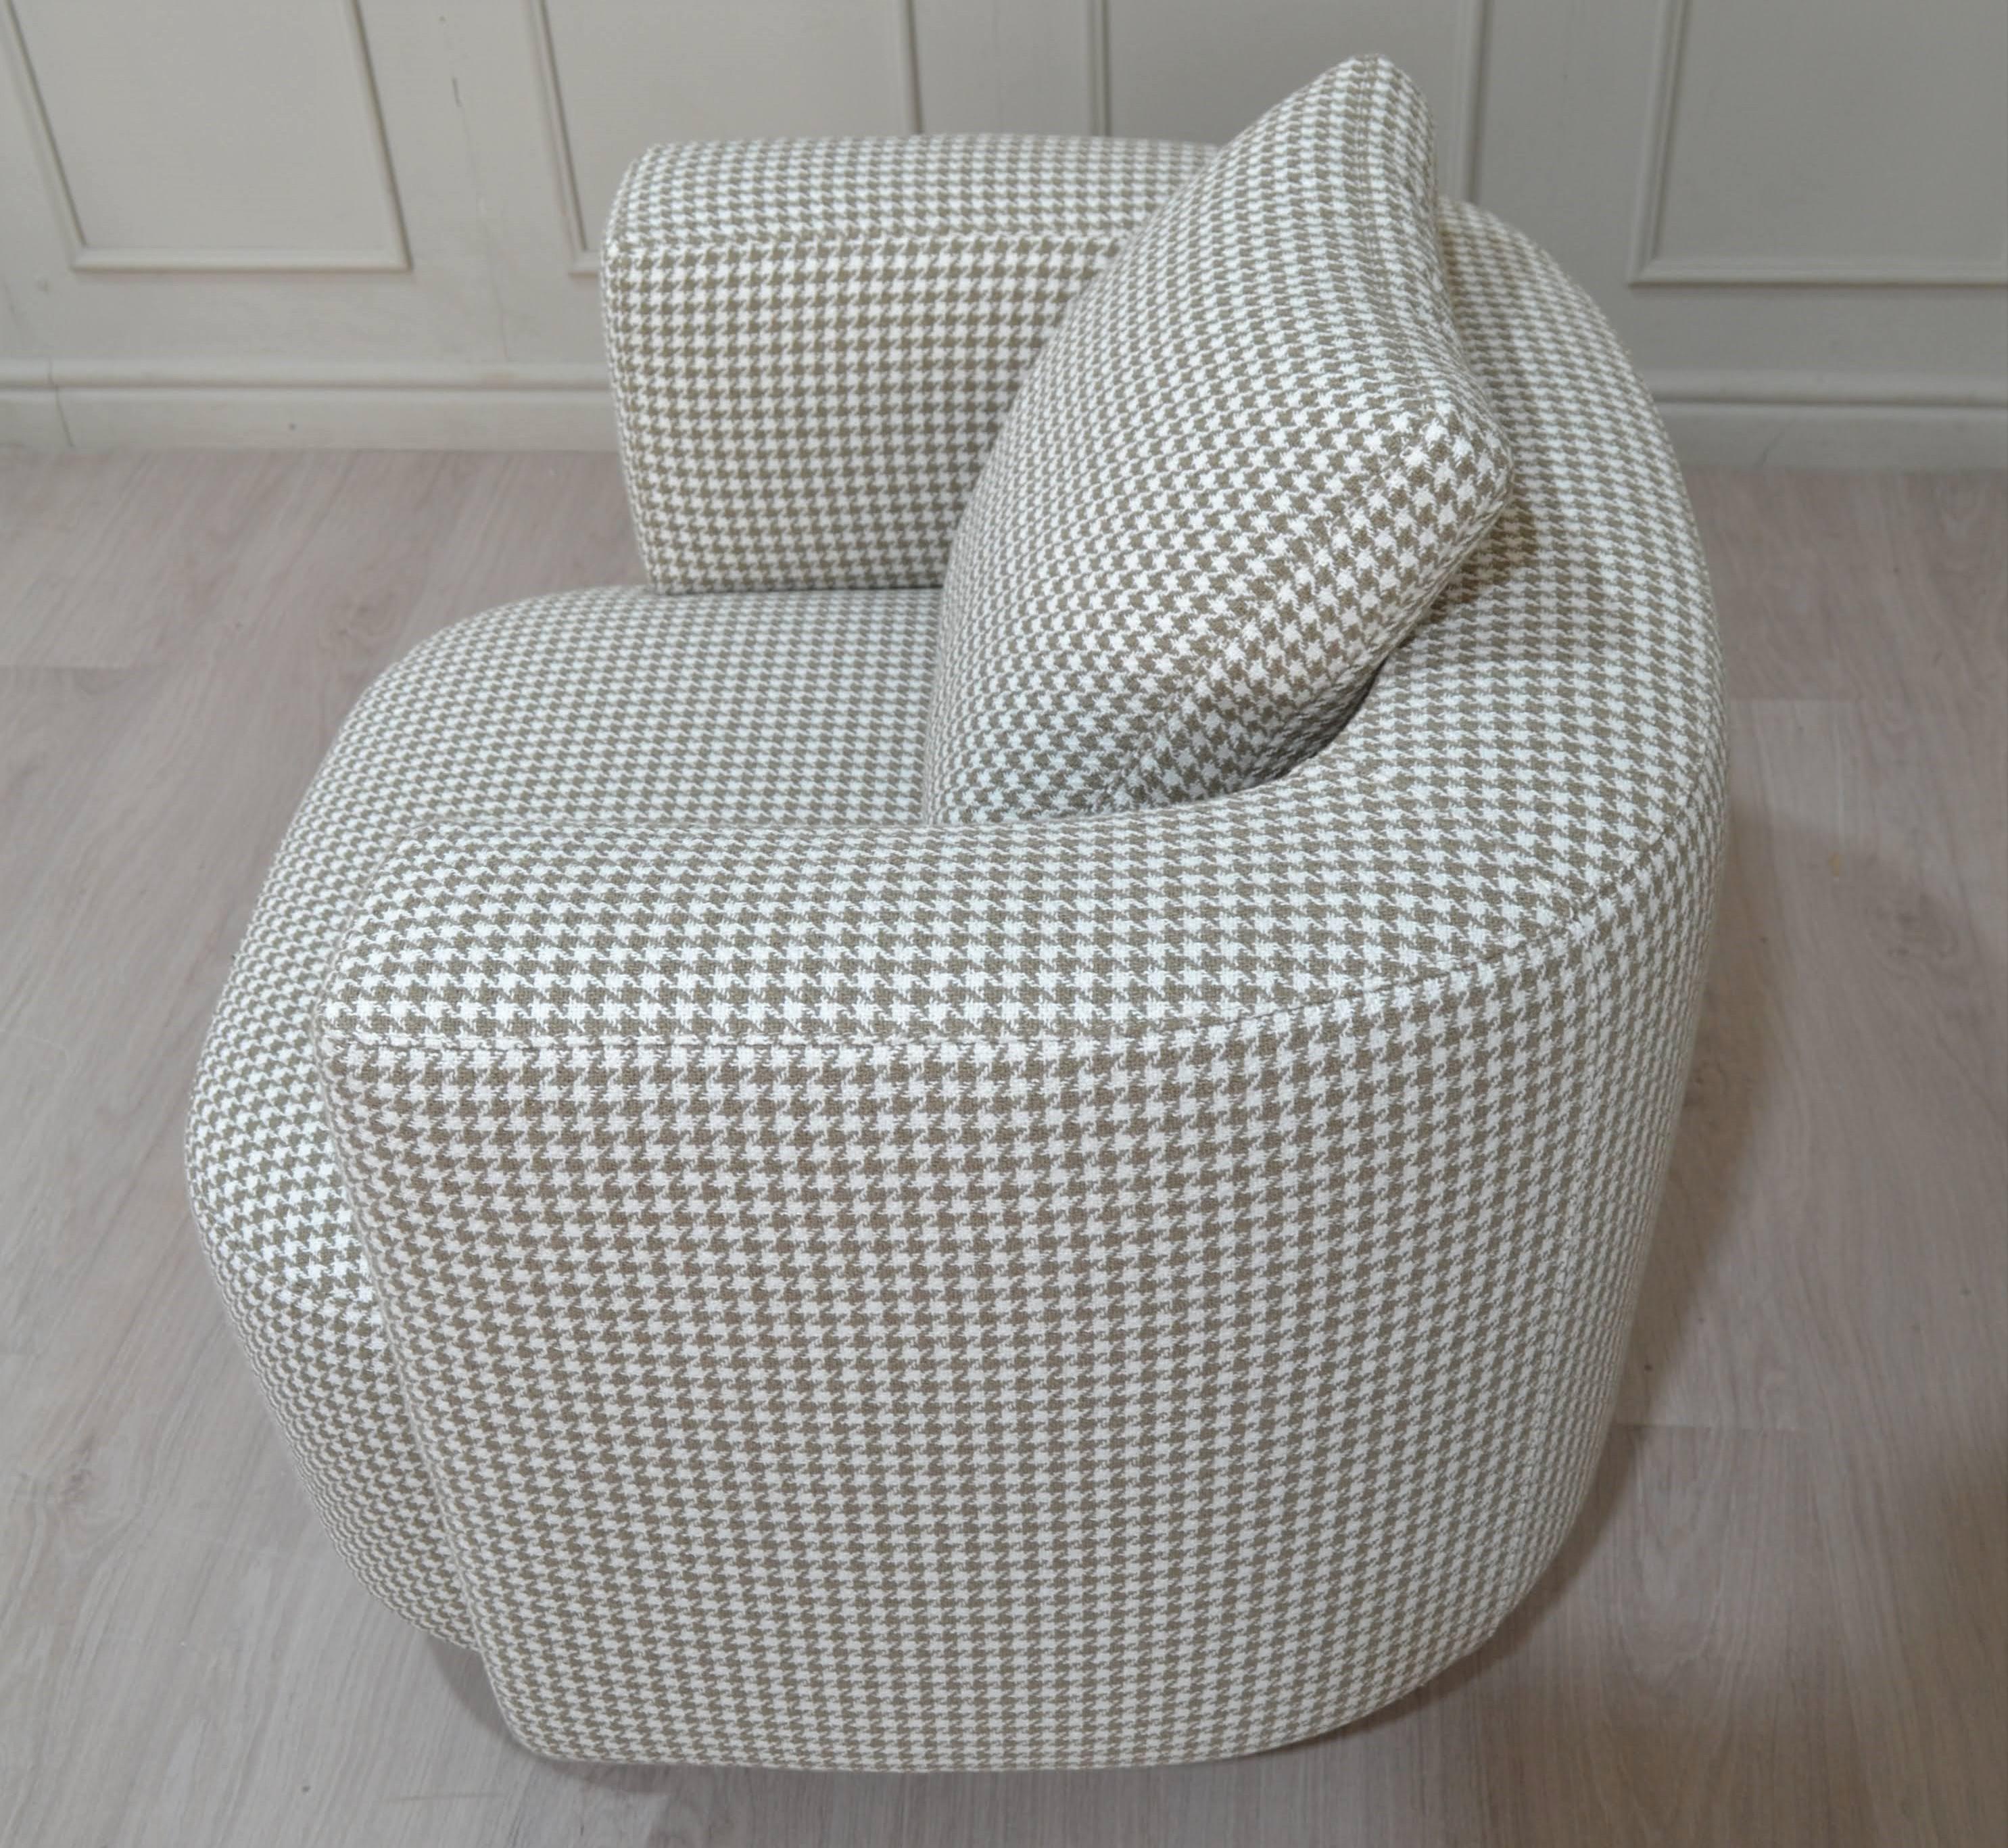 Italian Contemporary Lounge Upholstered Armchair in Gingham Pattern Fabric  For Sale 3